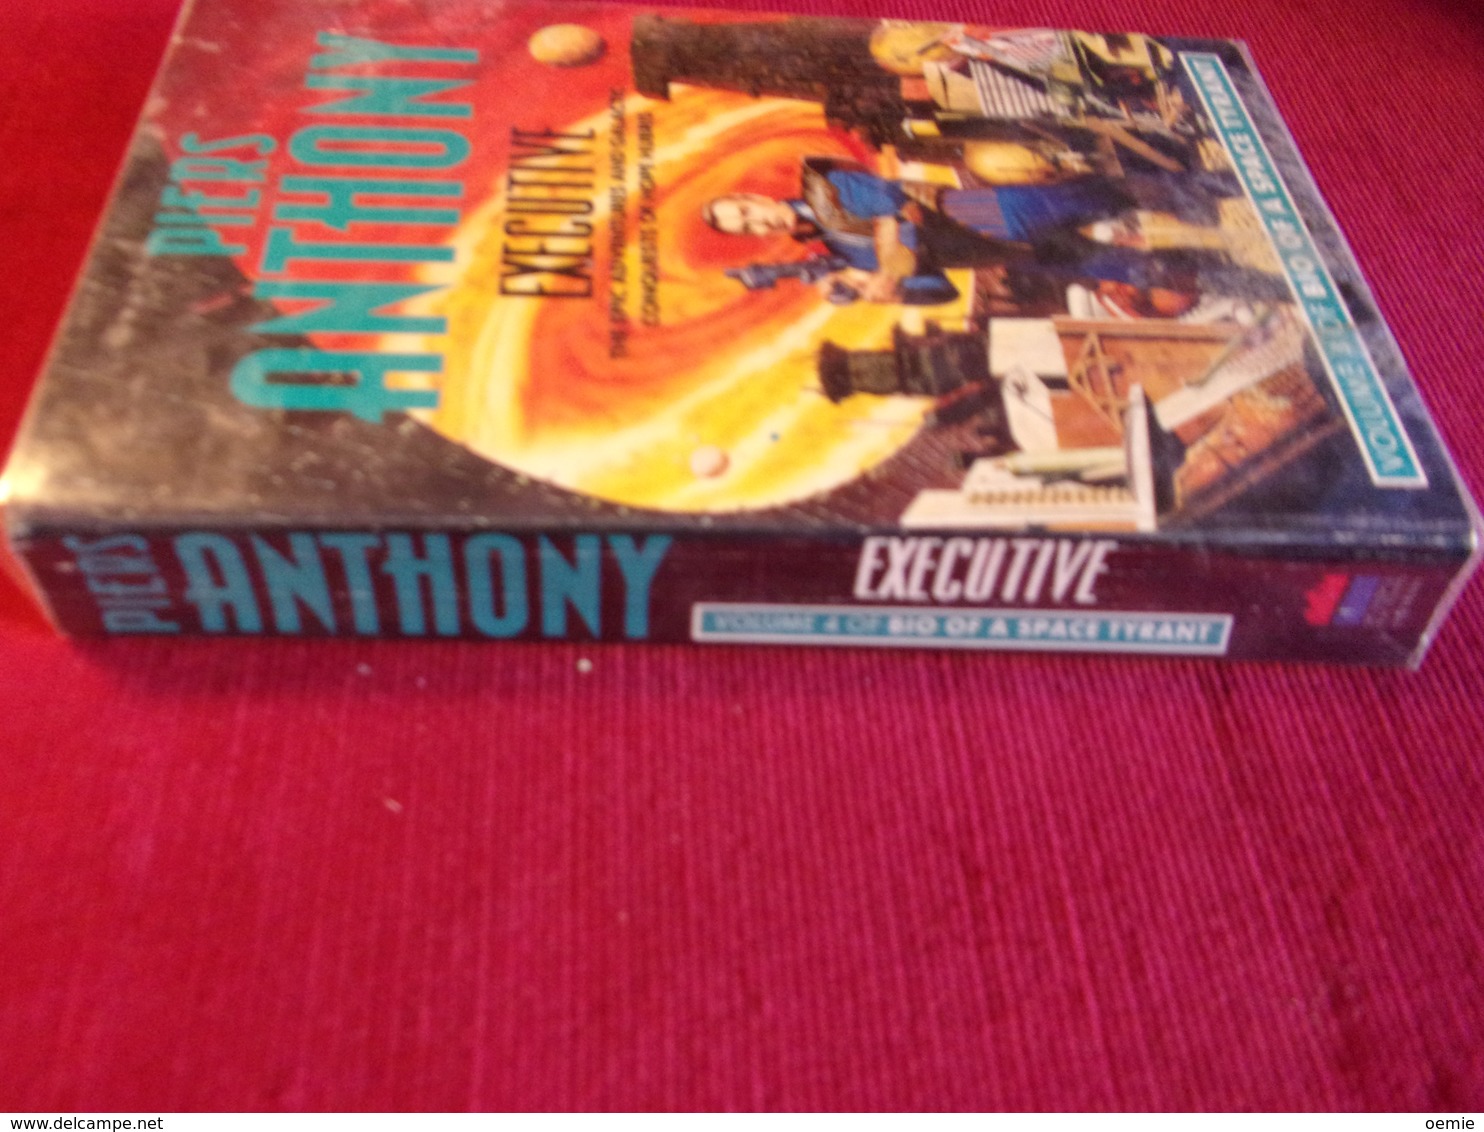 EXECUTIVE  VOLUME 4  °°°° PIERS ANTHONY - Science Fiction